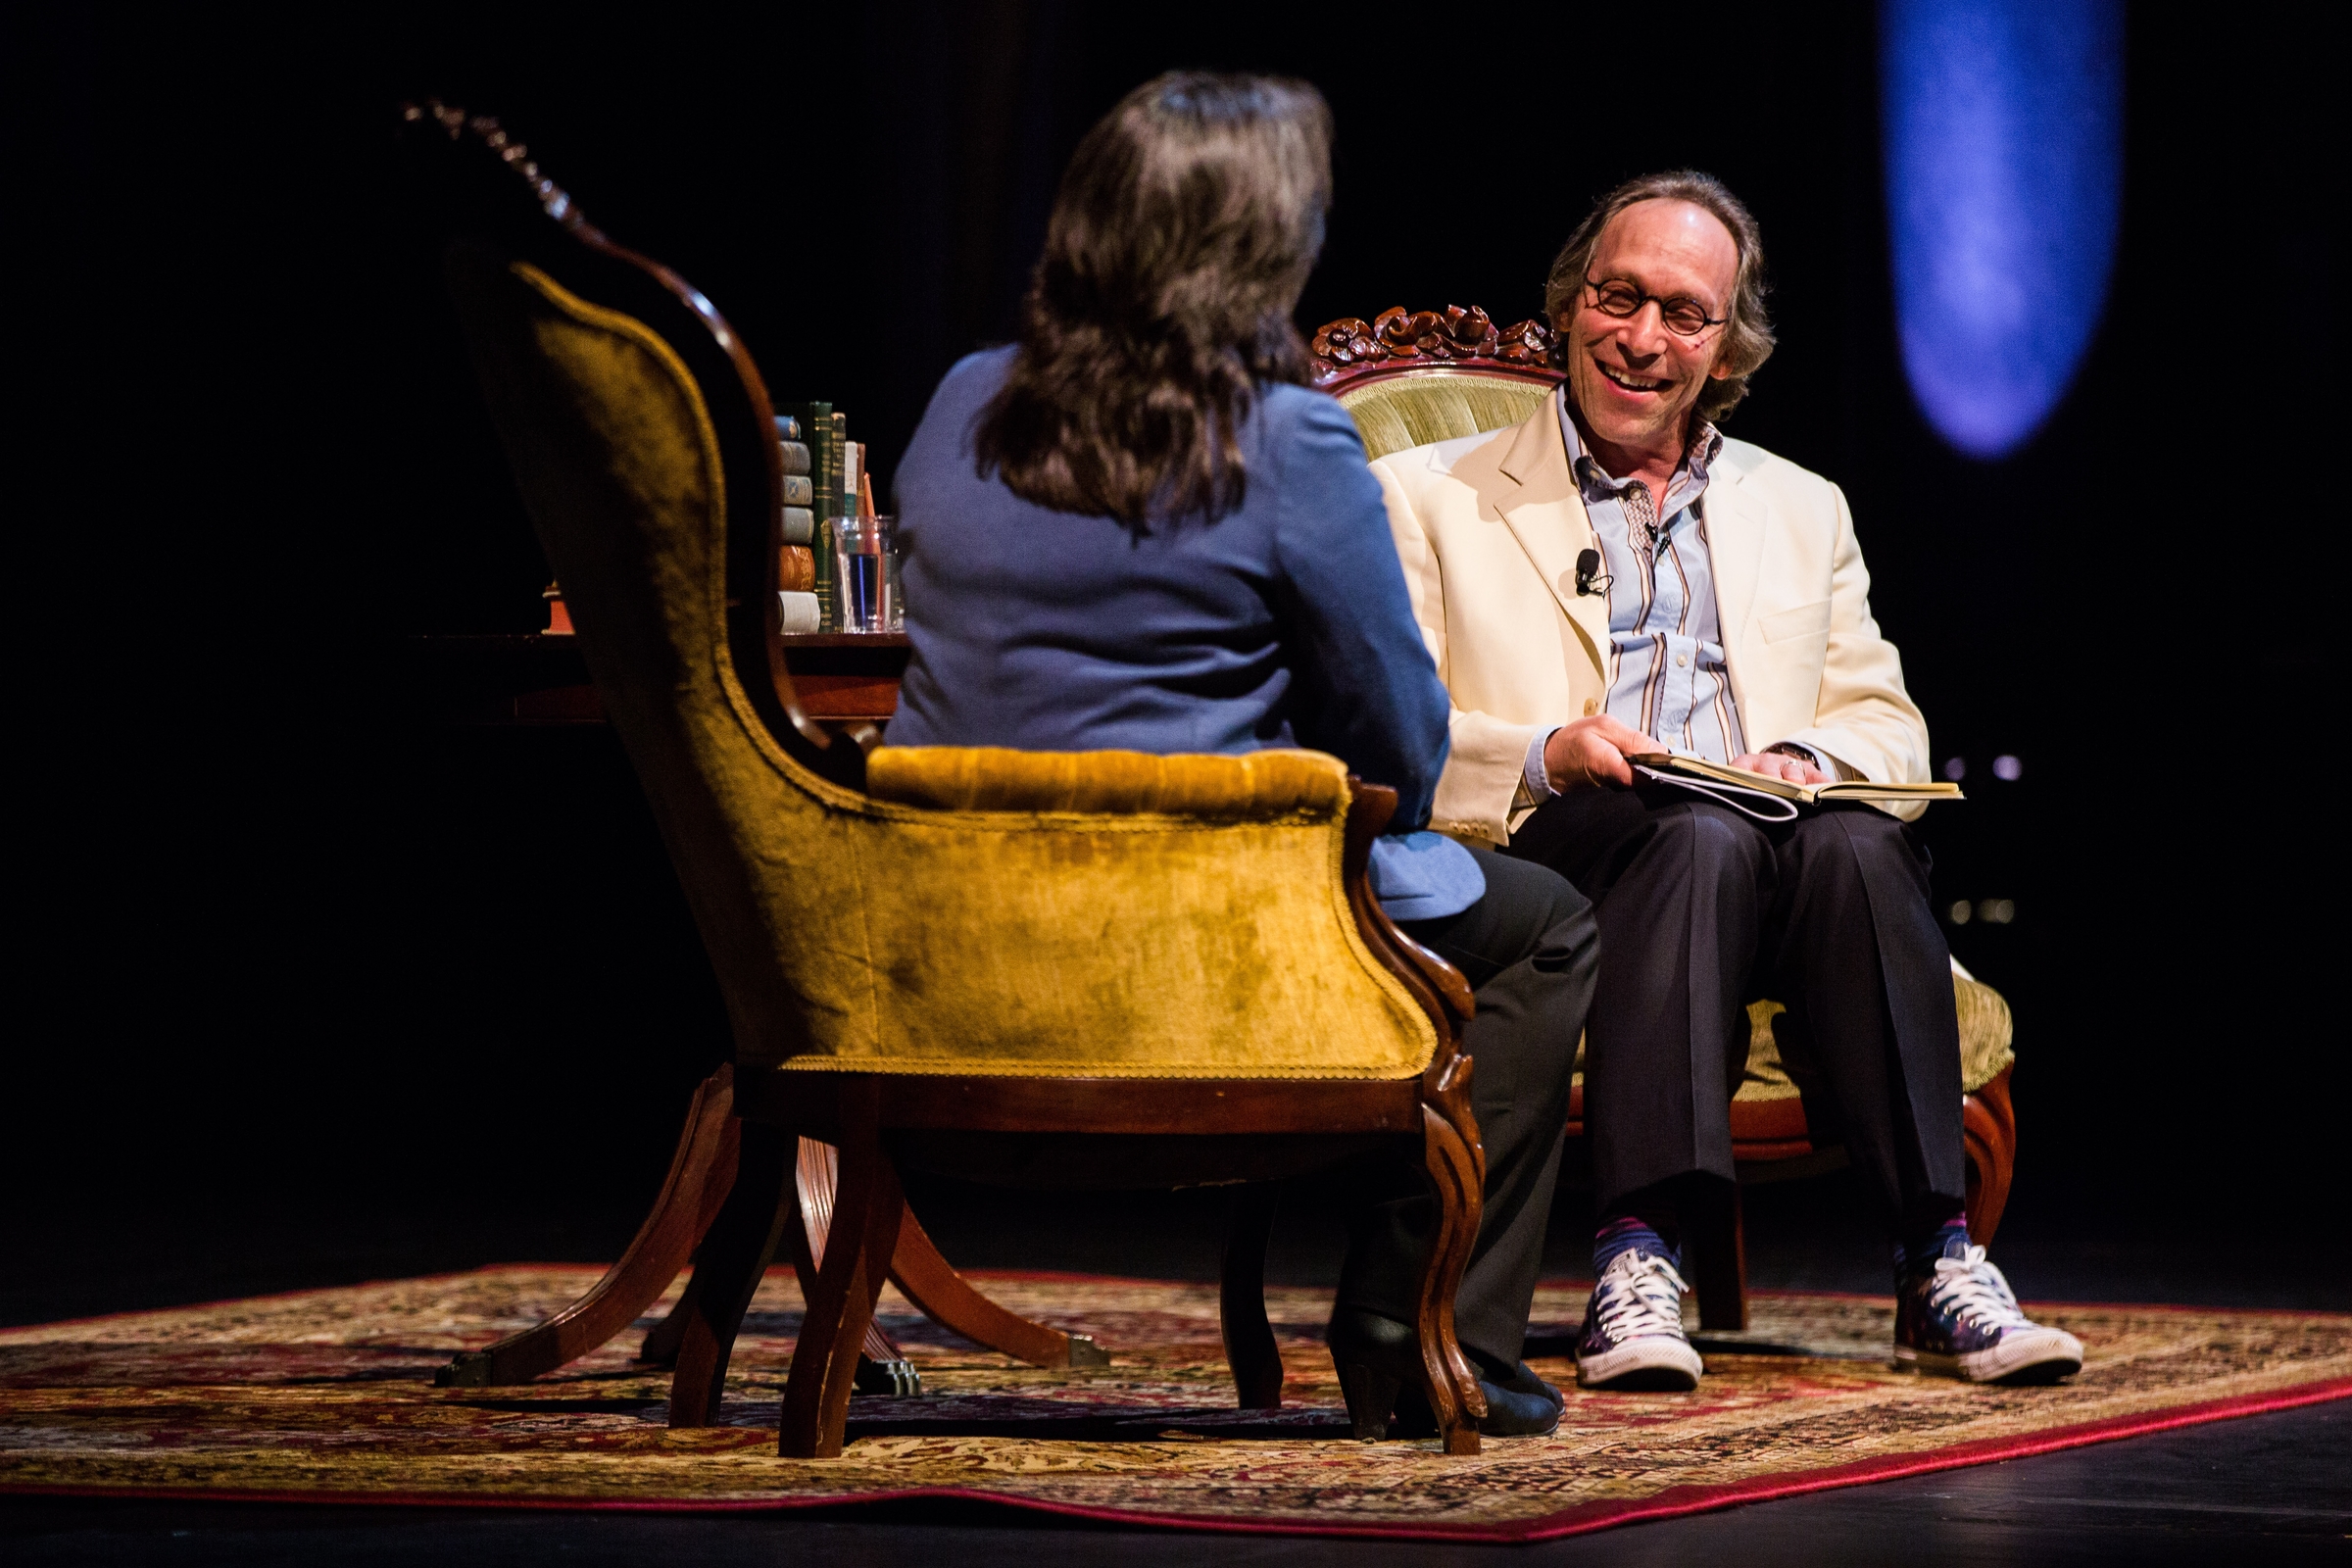 A man and a woman sit in easy chairs on a stage discussing science writing.